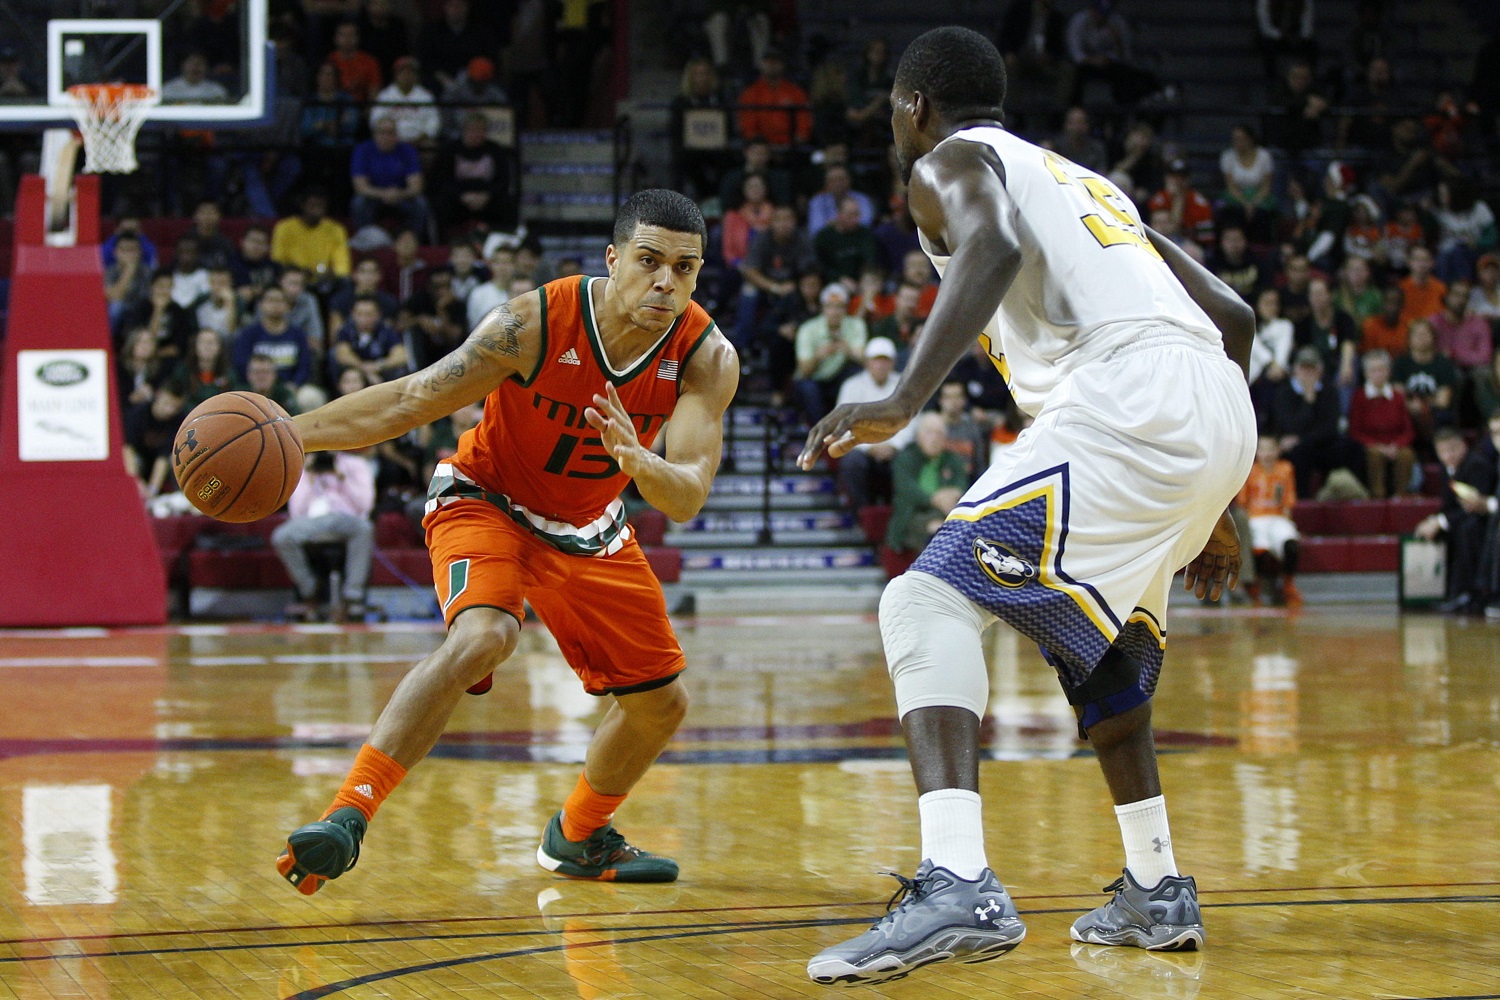 Miami's Angel Rodriguez, left, of Puerto Rico looks to make his move on La Salle's Rohan Brown, right, during the first half of an NCAA basketball game, Tuesday, Dec. 22, 2015, in Philadelphia. Miami won 95-49. (AP Photo/Chris Szagola)